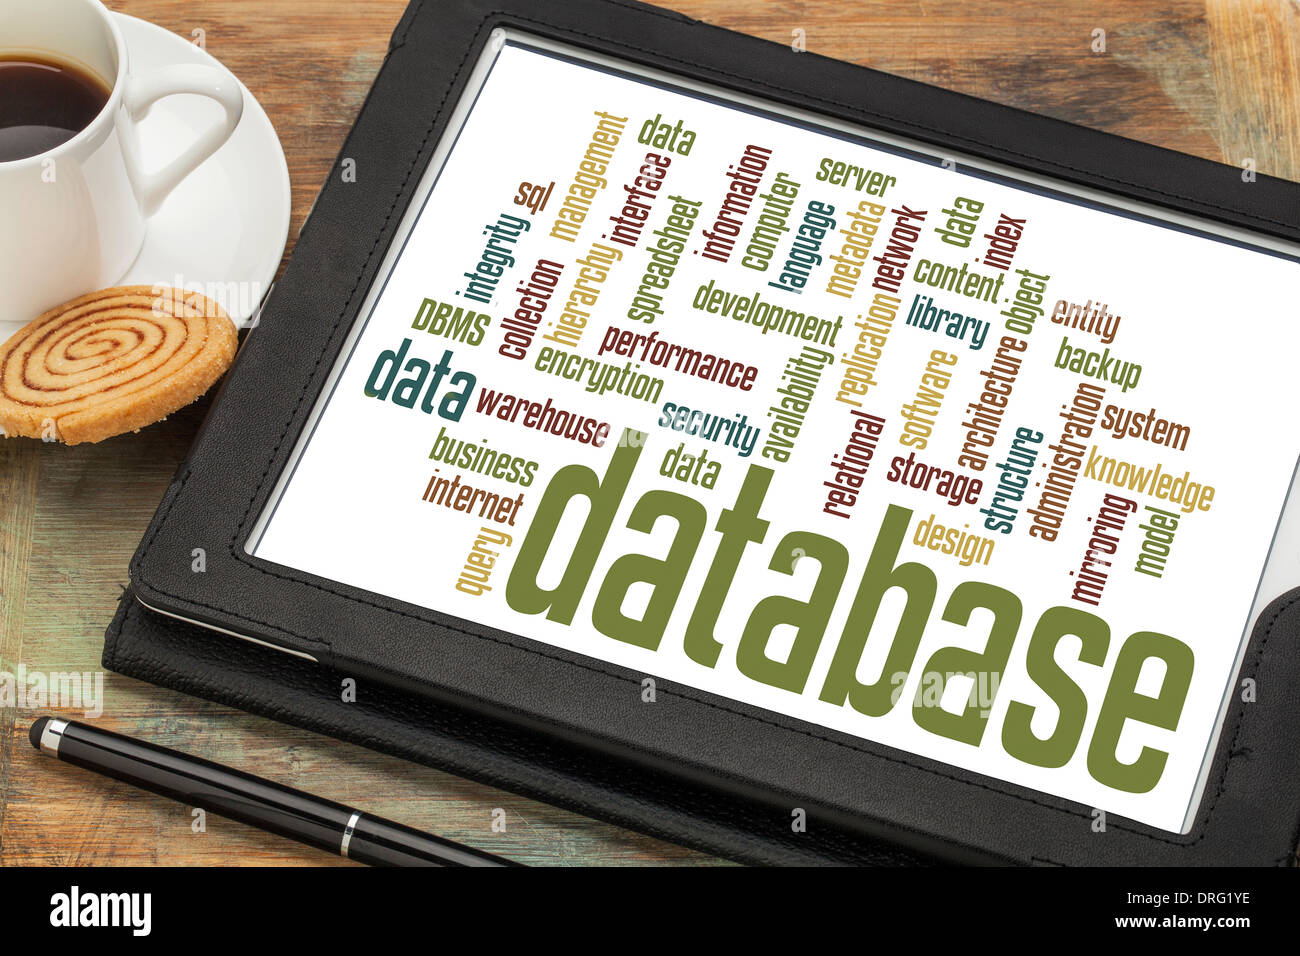 database word cloud on a digital tablet with a cup of coffee Stock Photo